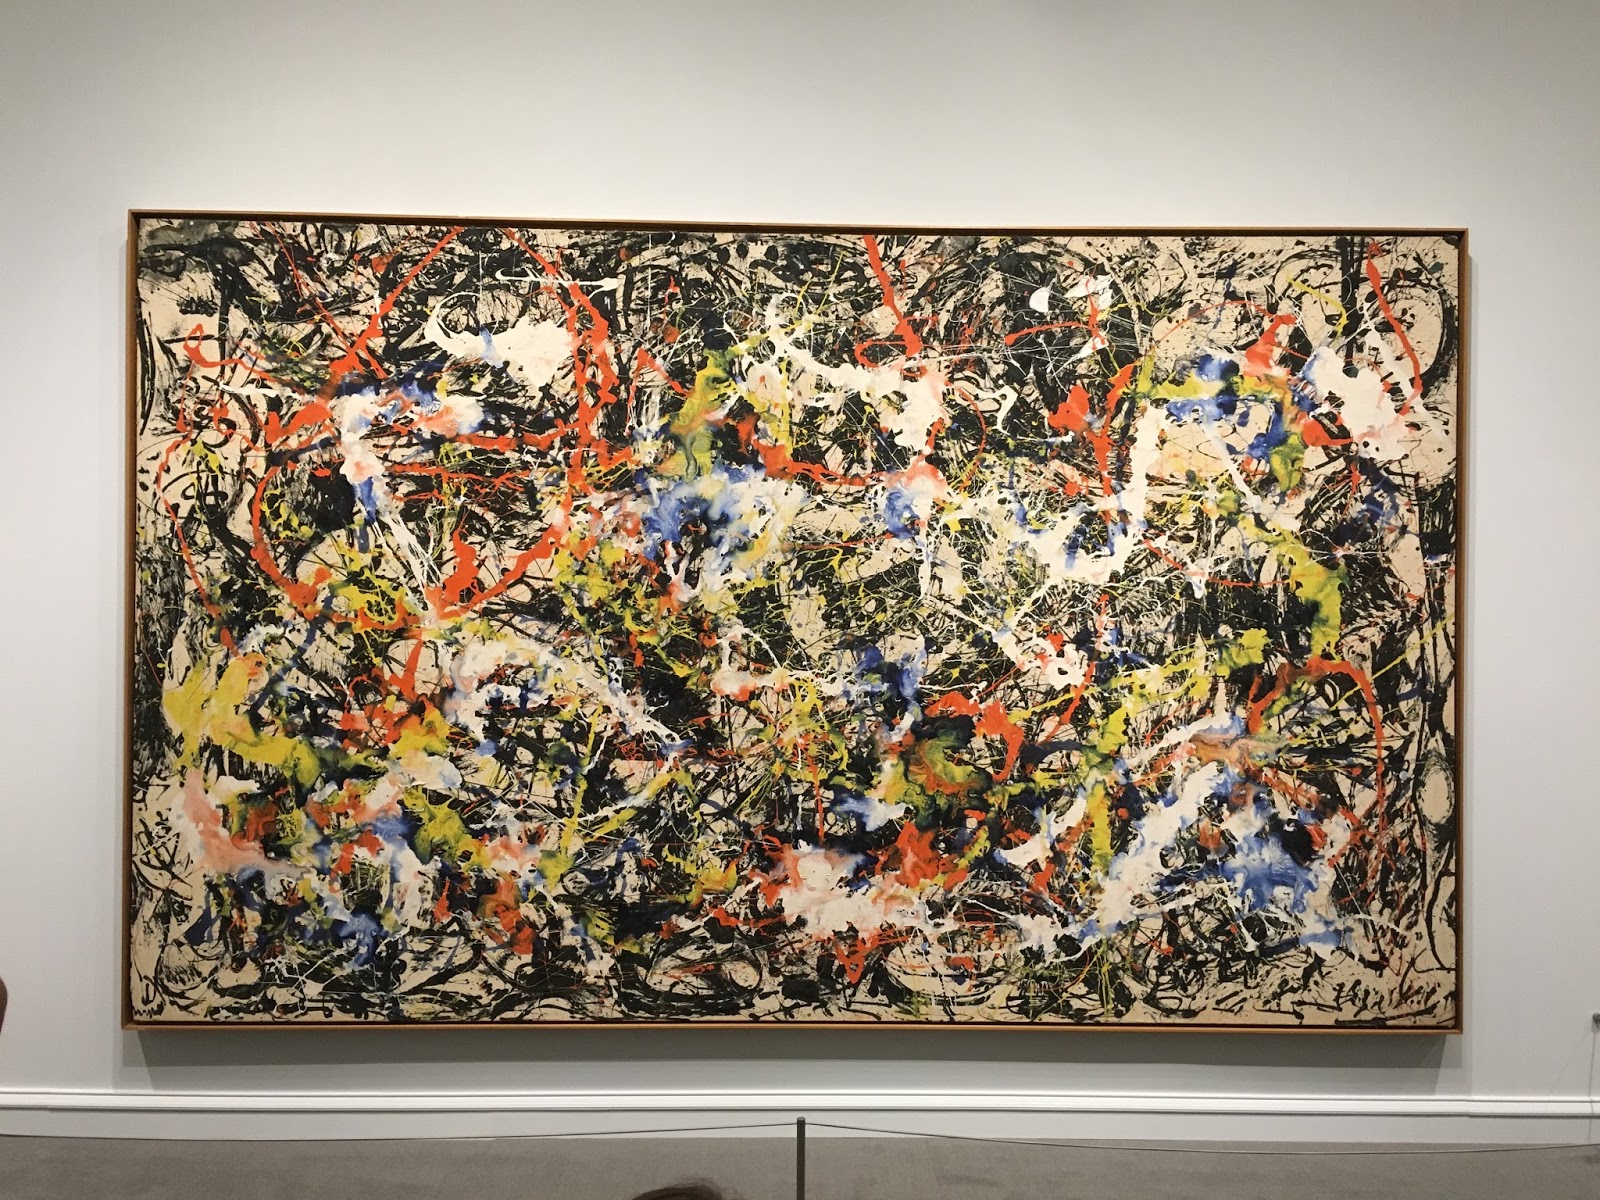 'Number 17a' By Jackson Pollock is one of the best paintings in the world painting